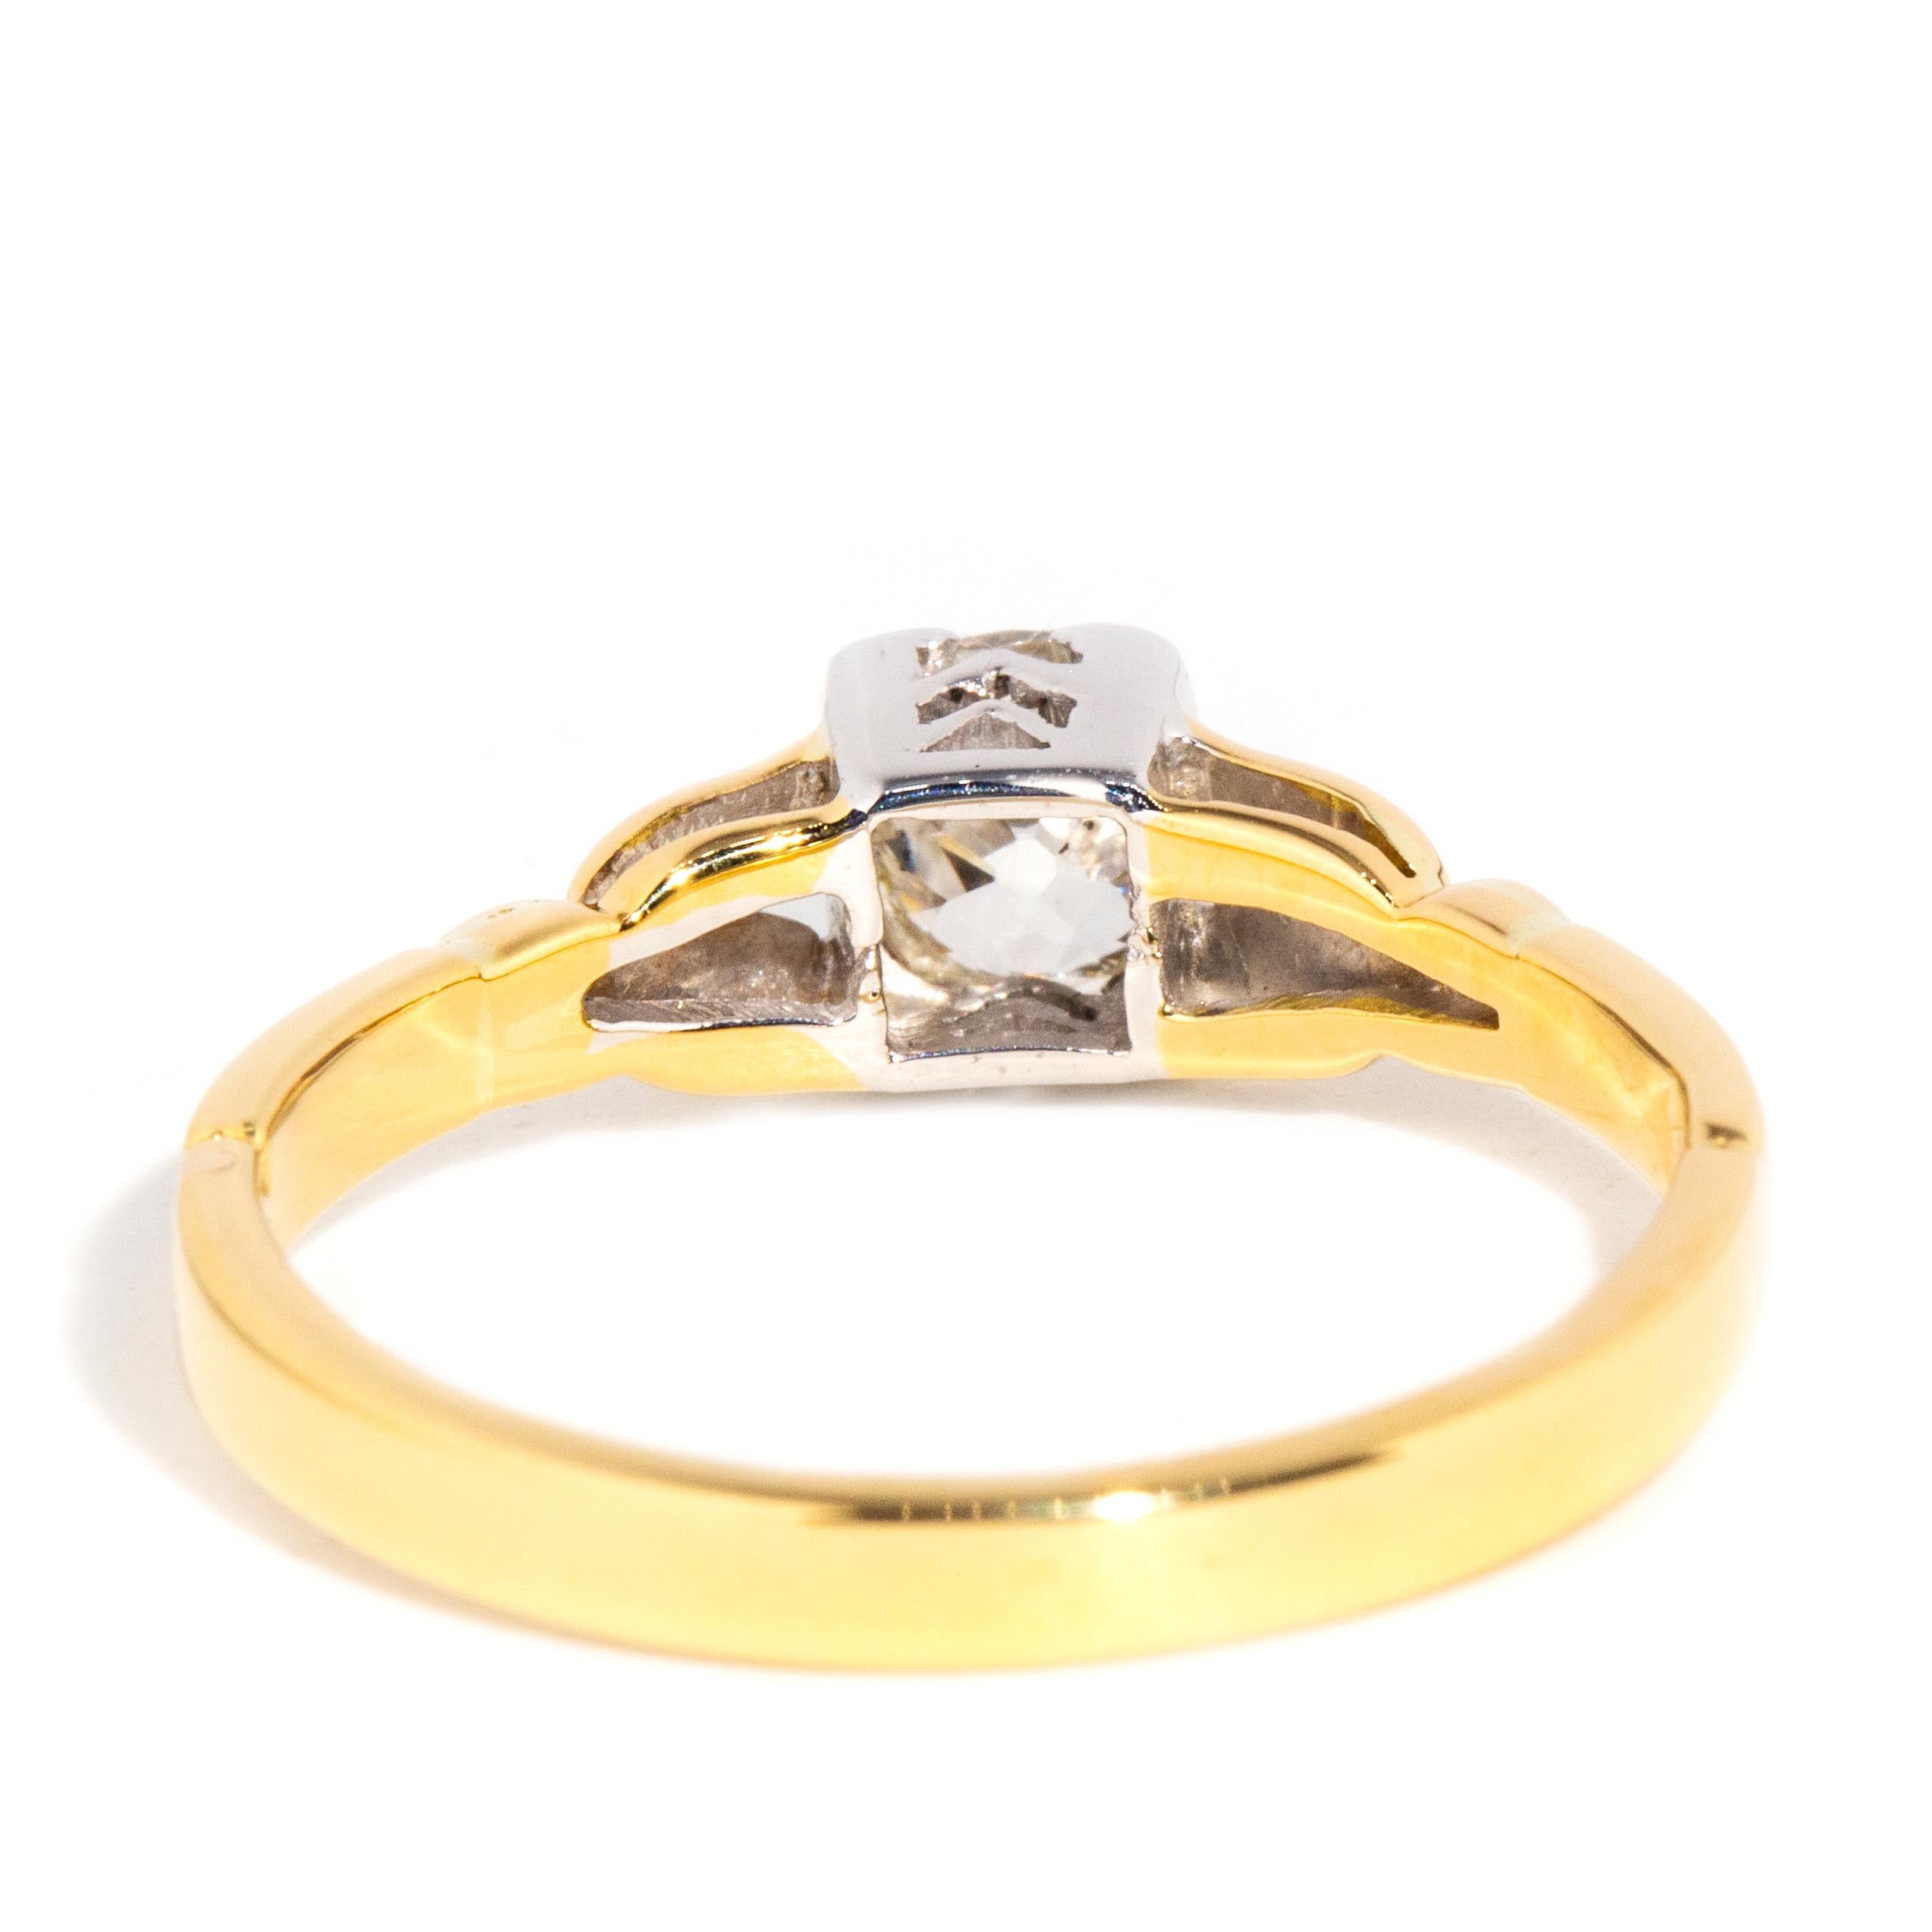 Women's Vintage 1930s 18 Carat Gold Partial Rub over Setting Old Mine Cut Diamond Ring For Sale